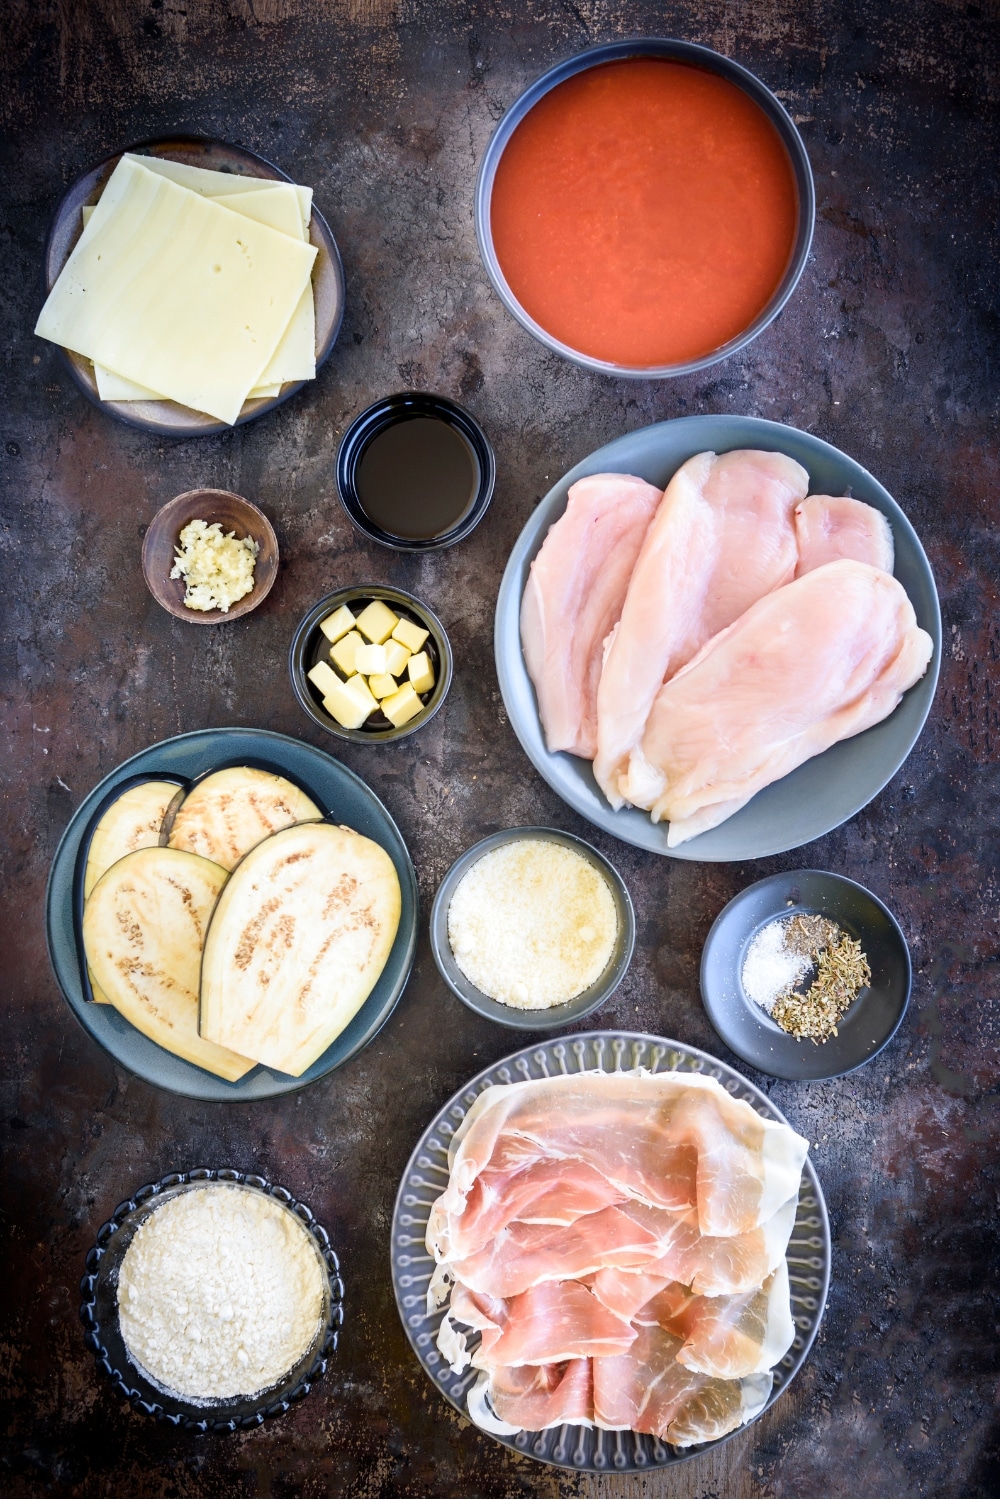 An assortment of ingredients including plates of raw chicken cutlets, sliced prosciutto, sliced eggplant, sliced cheese, and bowls of tomato sauce, flour, butter cubes, oil, and seasonings.